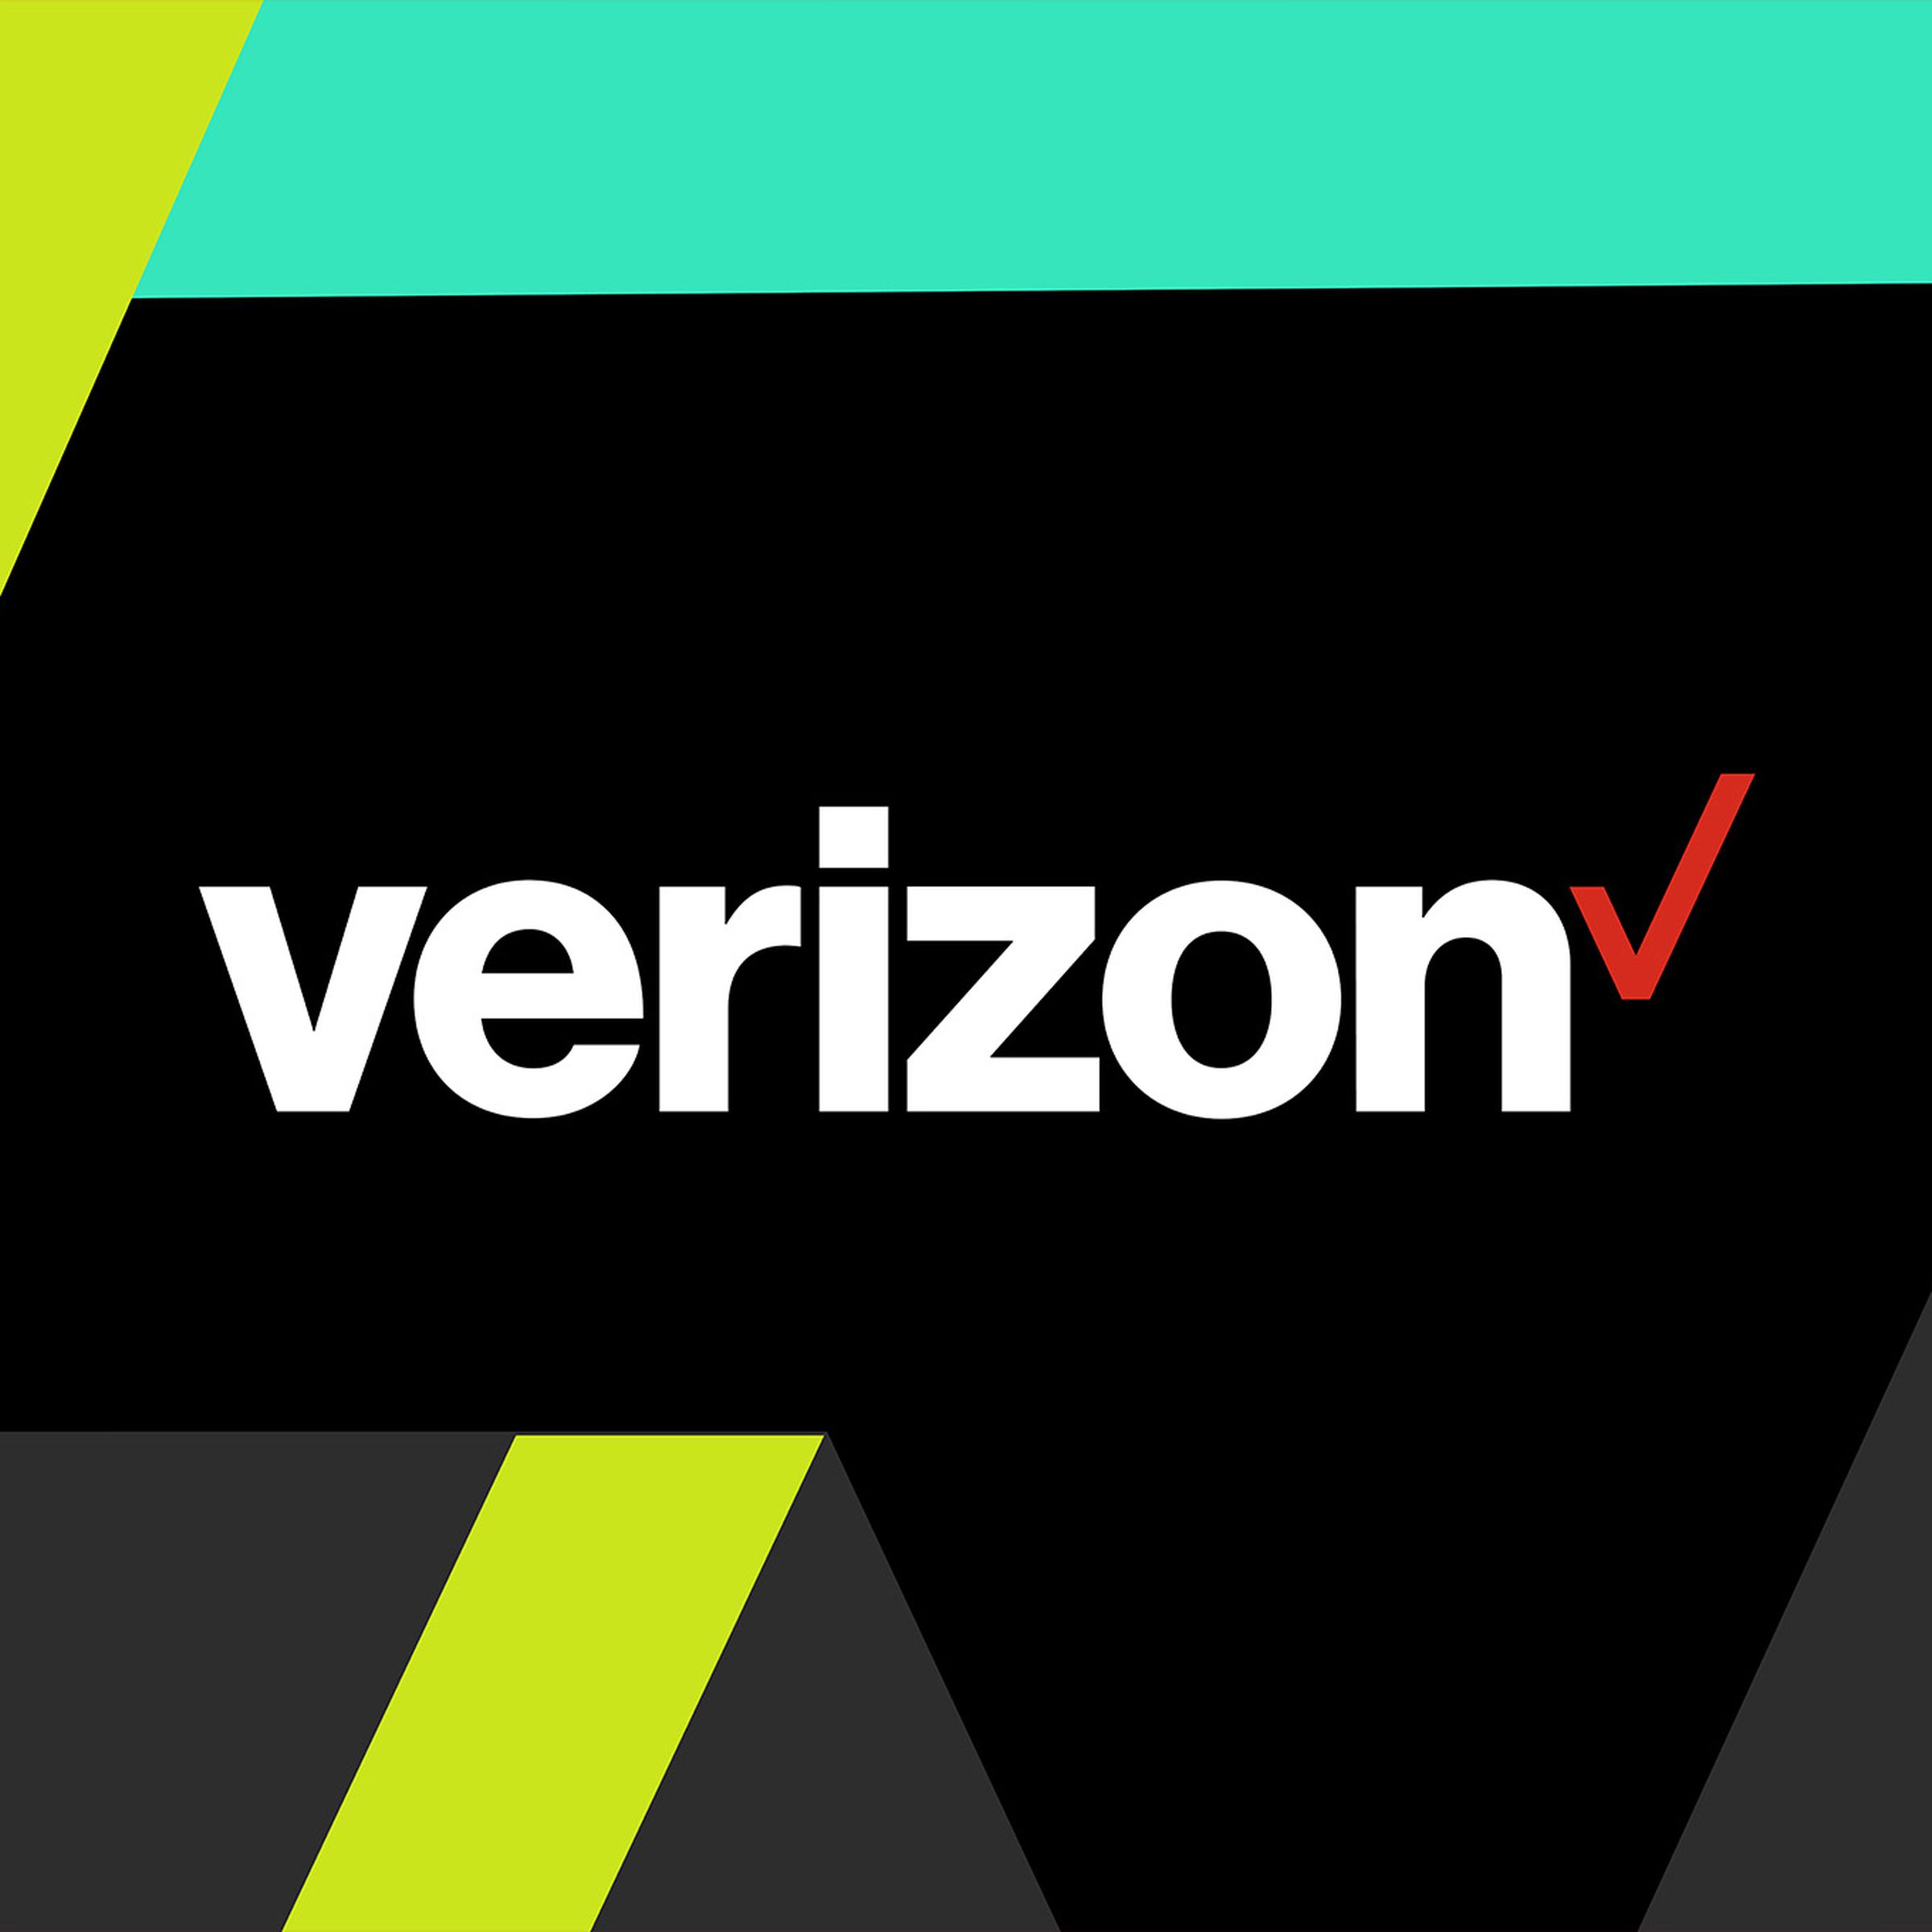 An image showing the Verizon logo on a geometric background